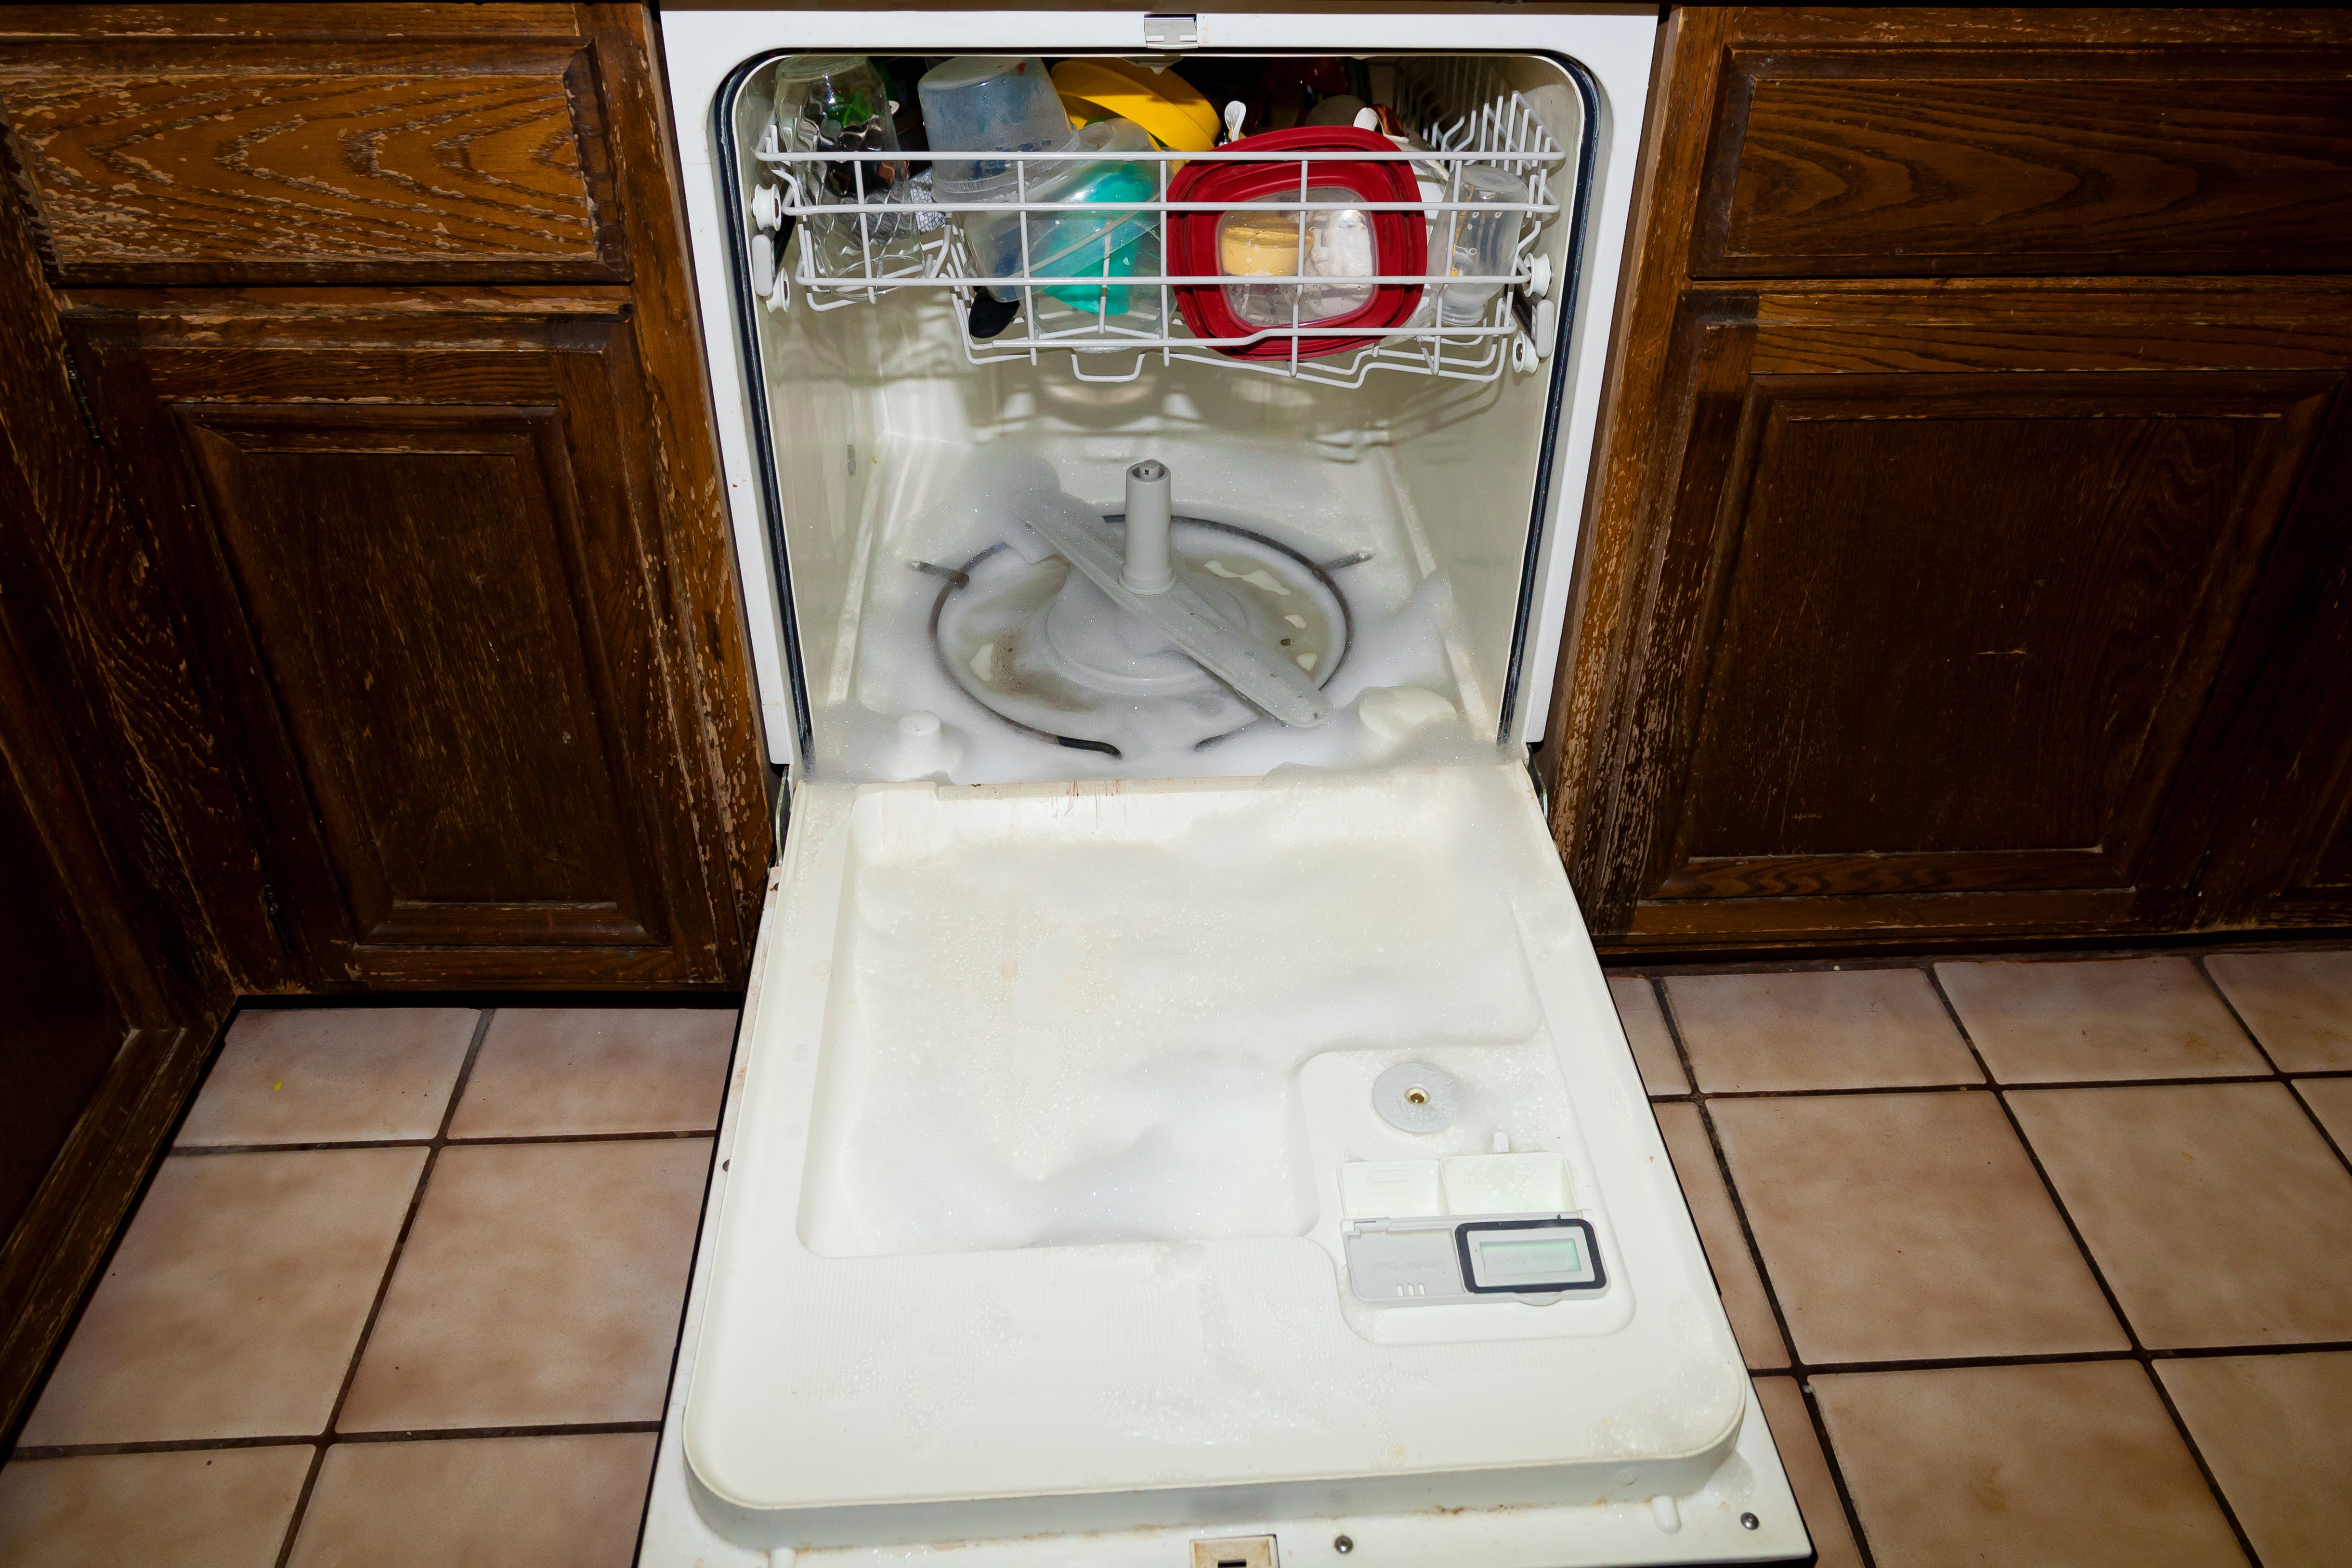 Dishwasher Failure Signs Fort Myers Residents should Heed